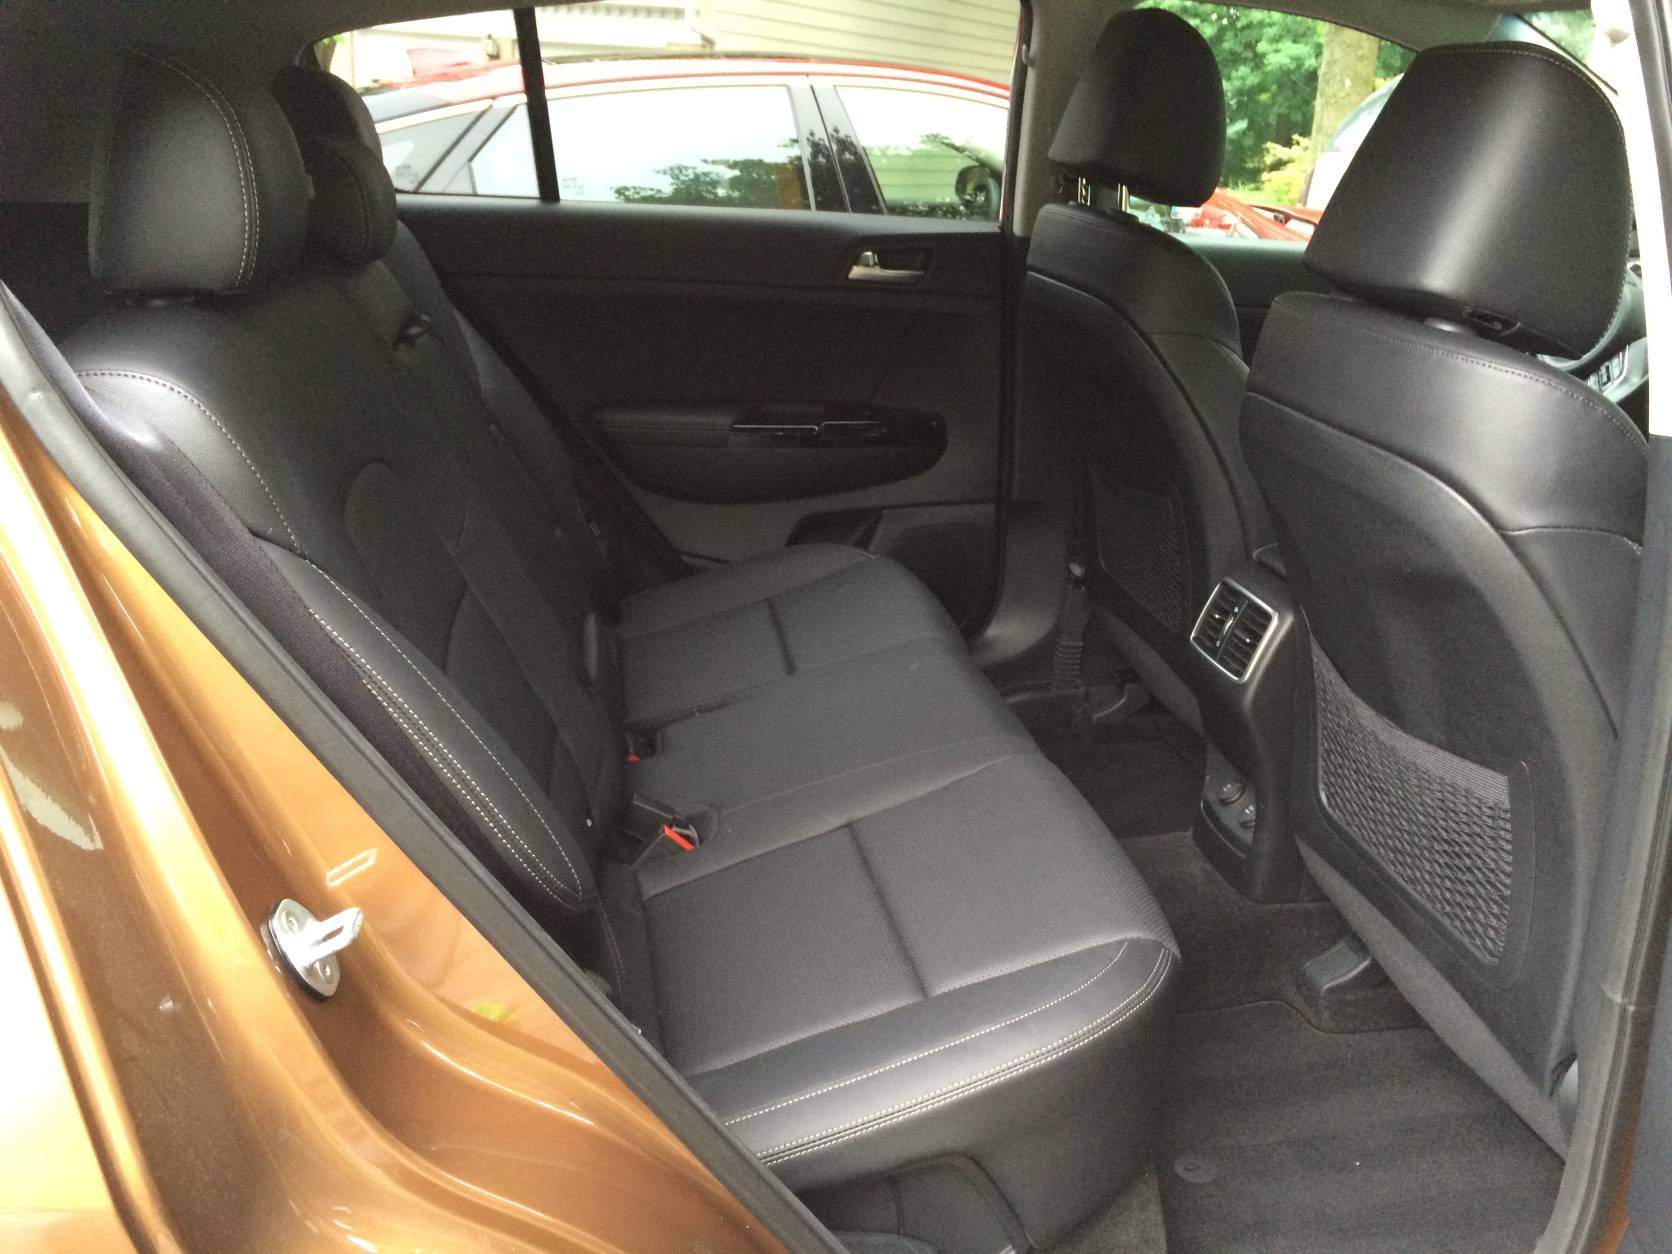 Kia didn’t forget the inside. It’s an upscale look for this class. (WTOP/Mike Parris)